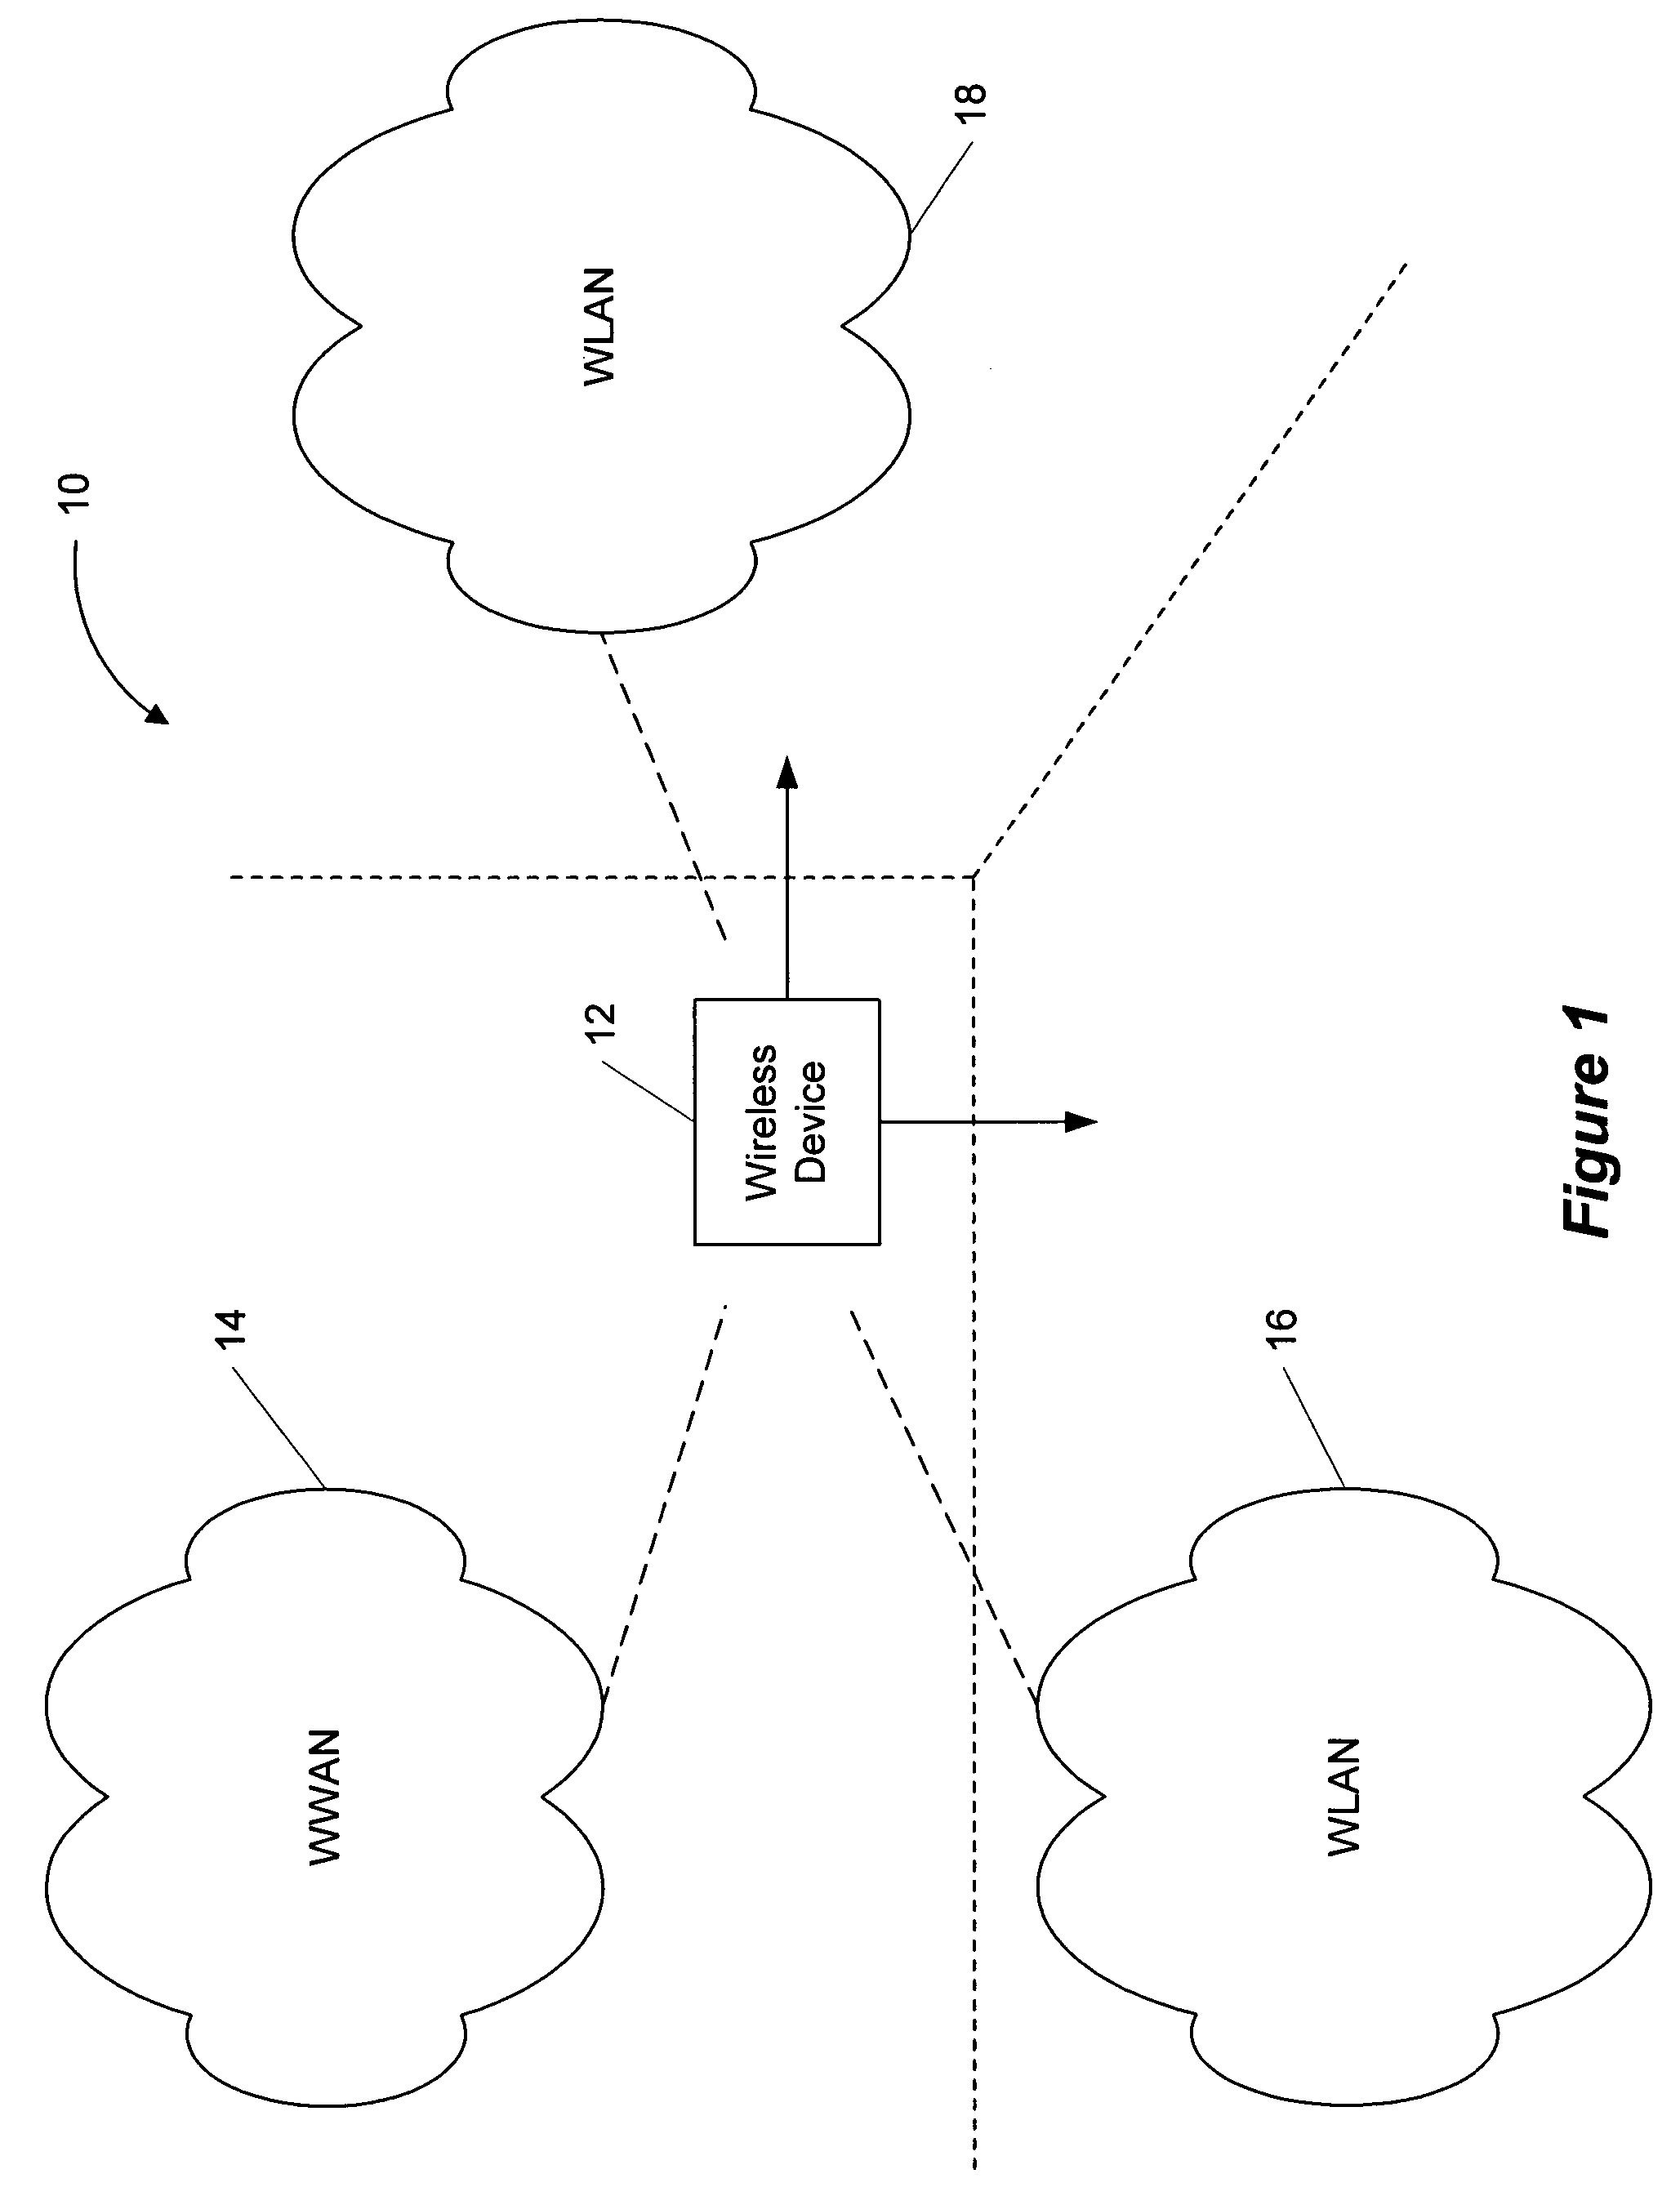 Systems and methods for seamless roaming between wireless networks